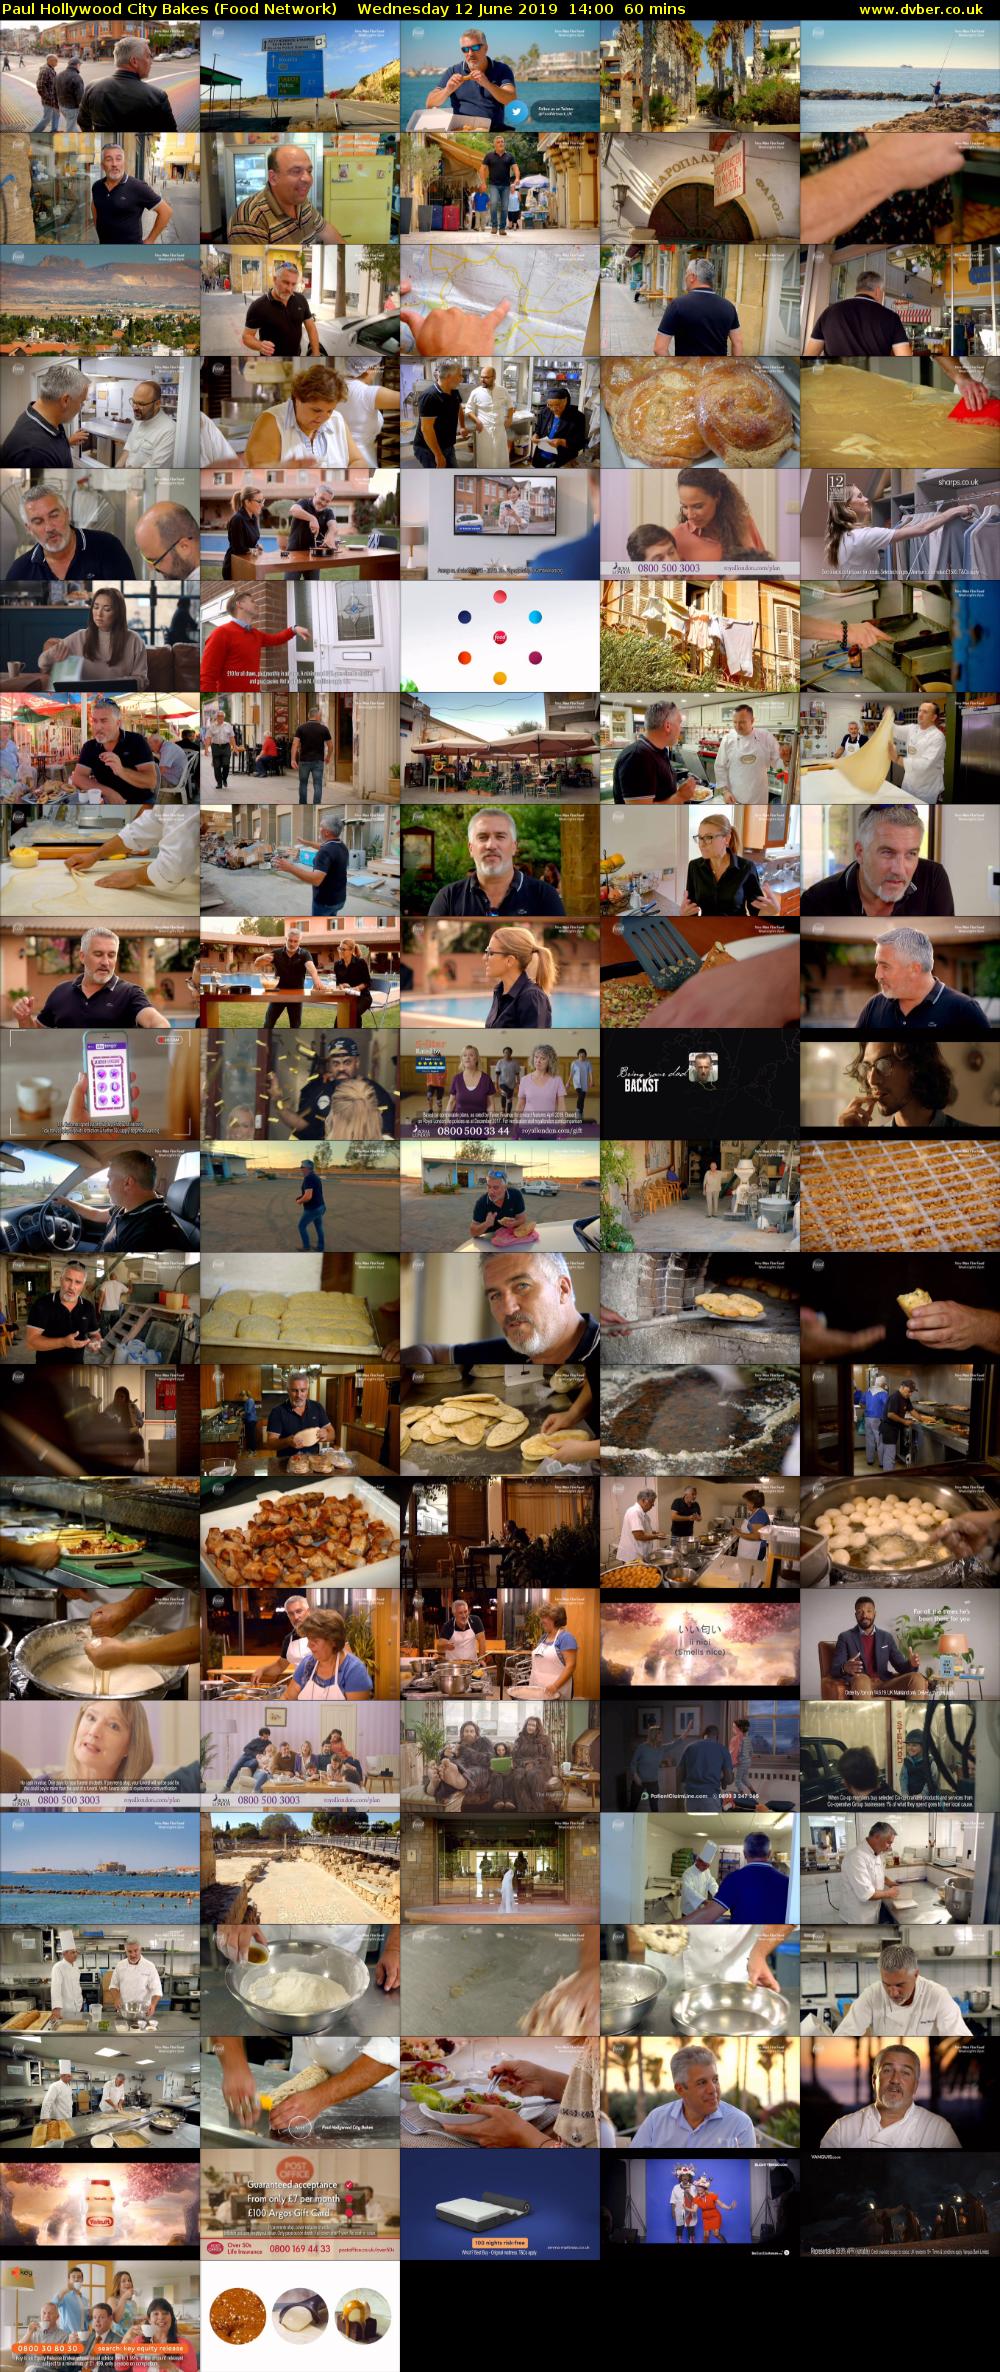 Paul Hollywood City Bakes (Food Network) Wednesday 12 June 2019 14:00 - 15:00